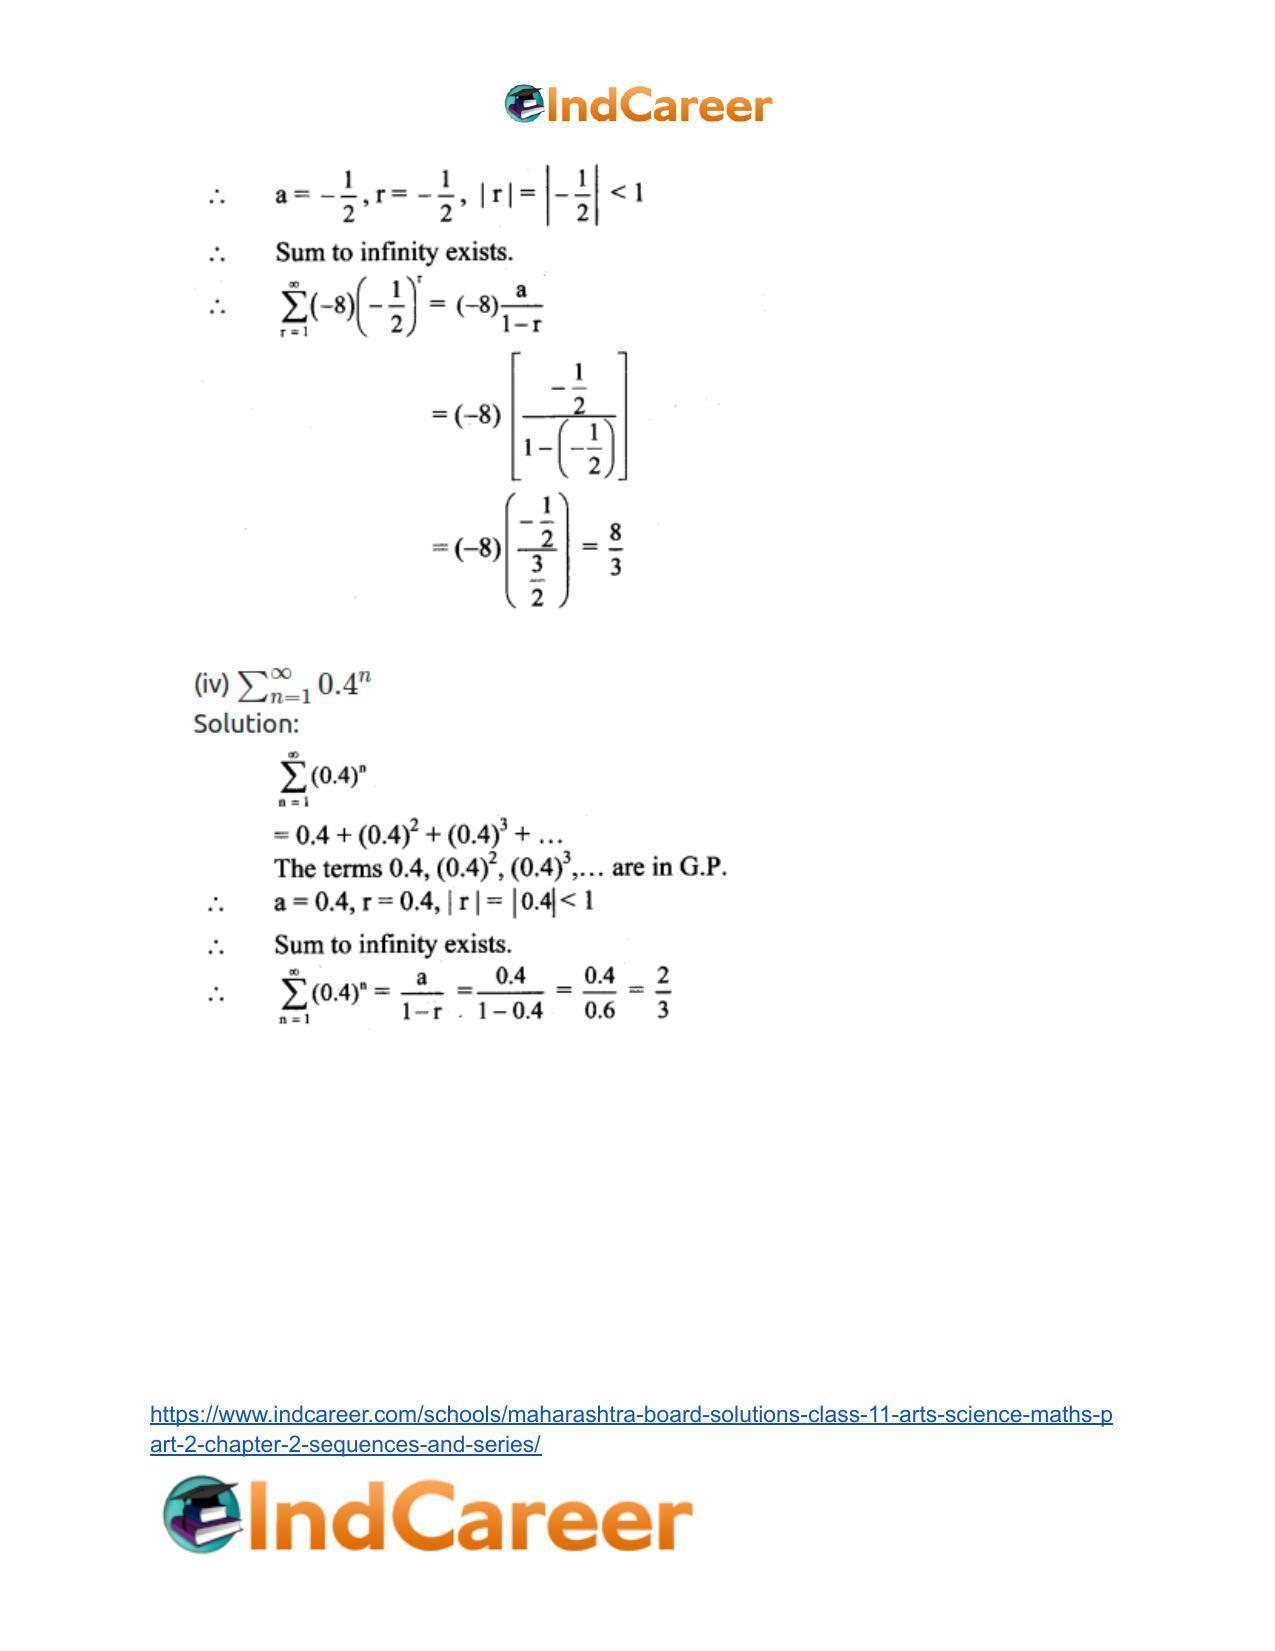 Maharashtra Board Solutions Class 11-Arts & Science Maths (Part 2): Chapter 2- Sequences and Series - Page 47